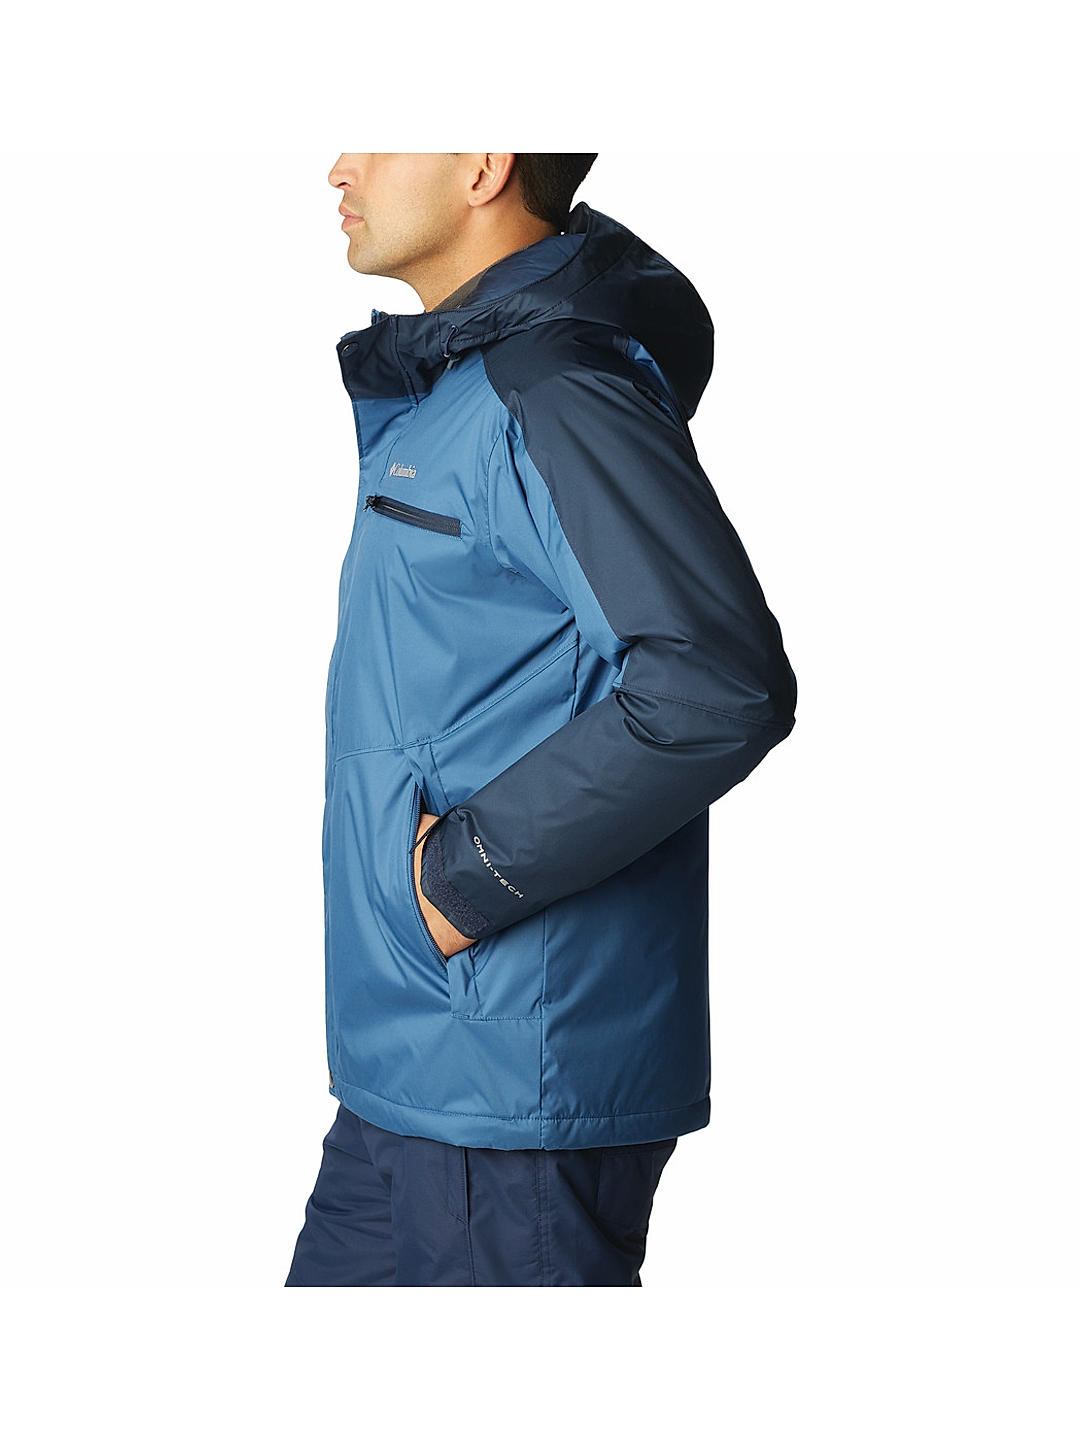 Columbia Men's Valley Point Winter Ski Jacket, Insulated, Hooded, Waterproof